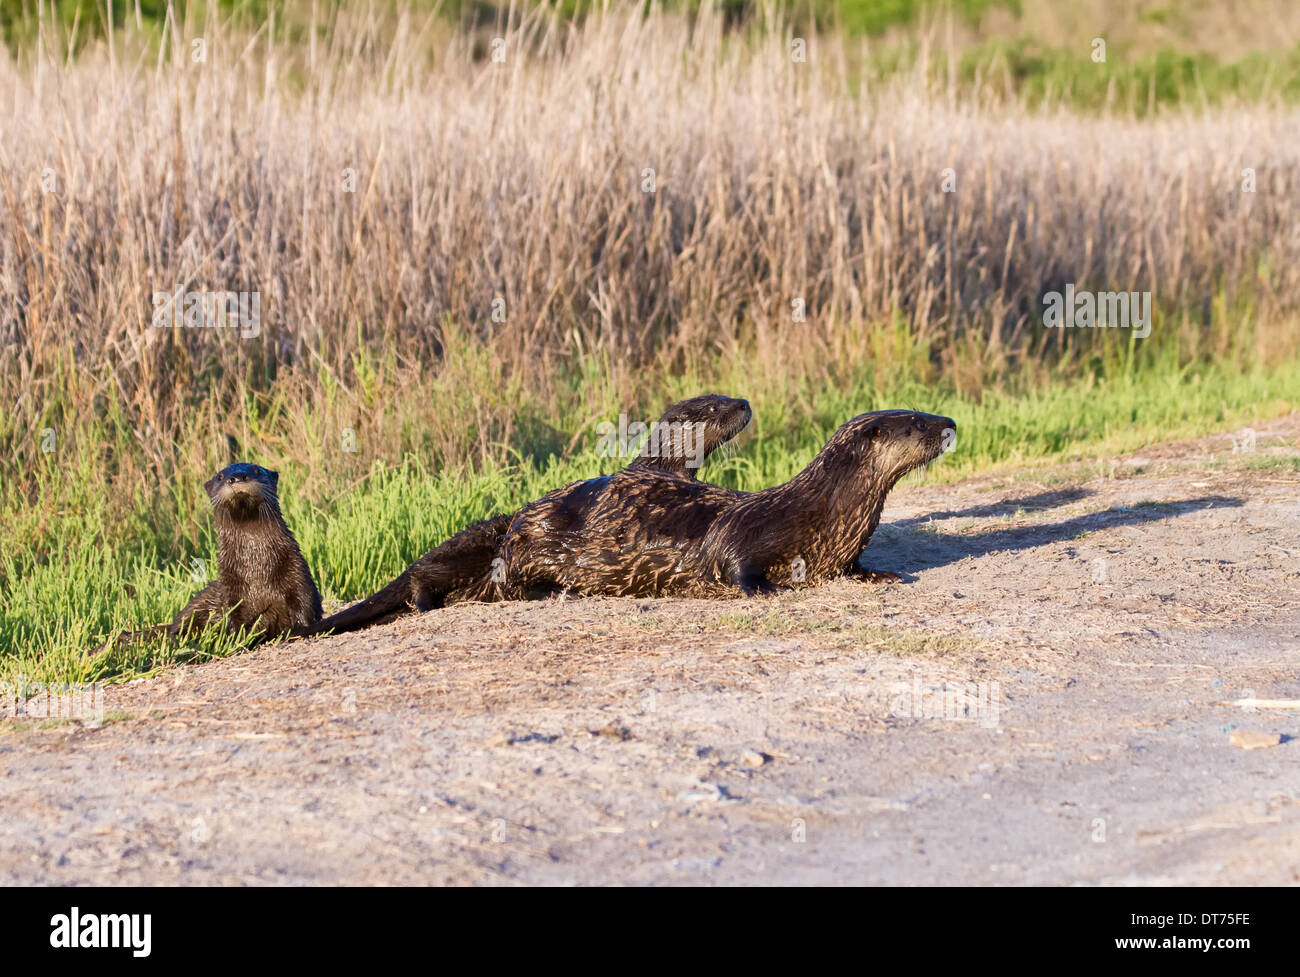 North American river otter (Lontra canadensis) mother and kits crossing a footpath. Stock Photo